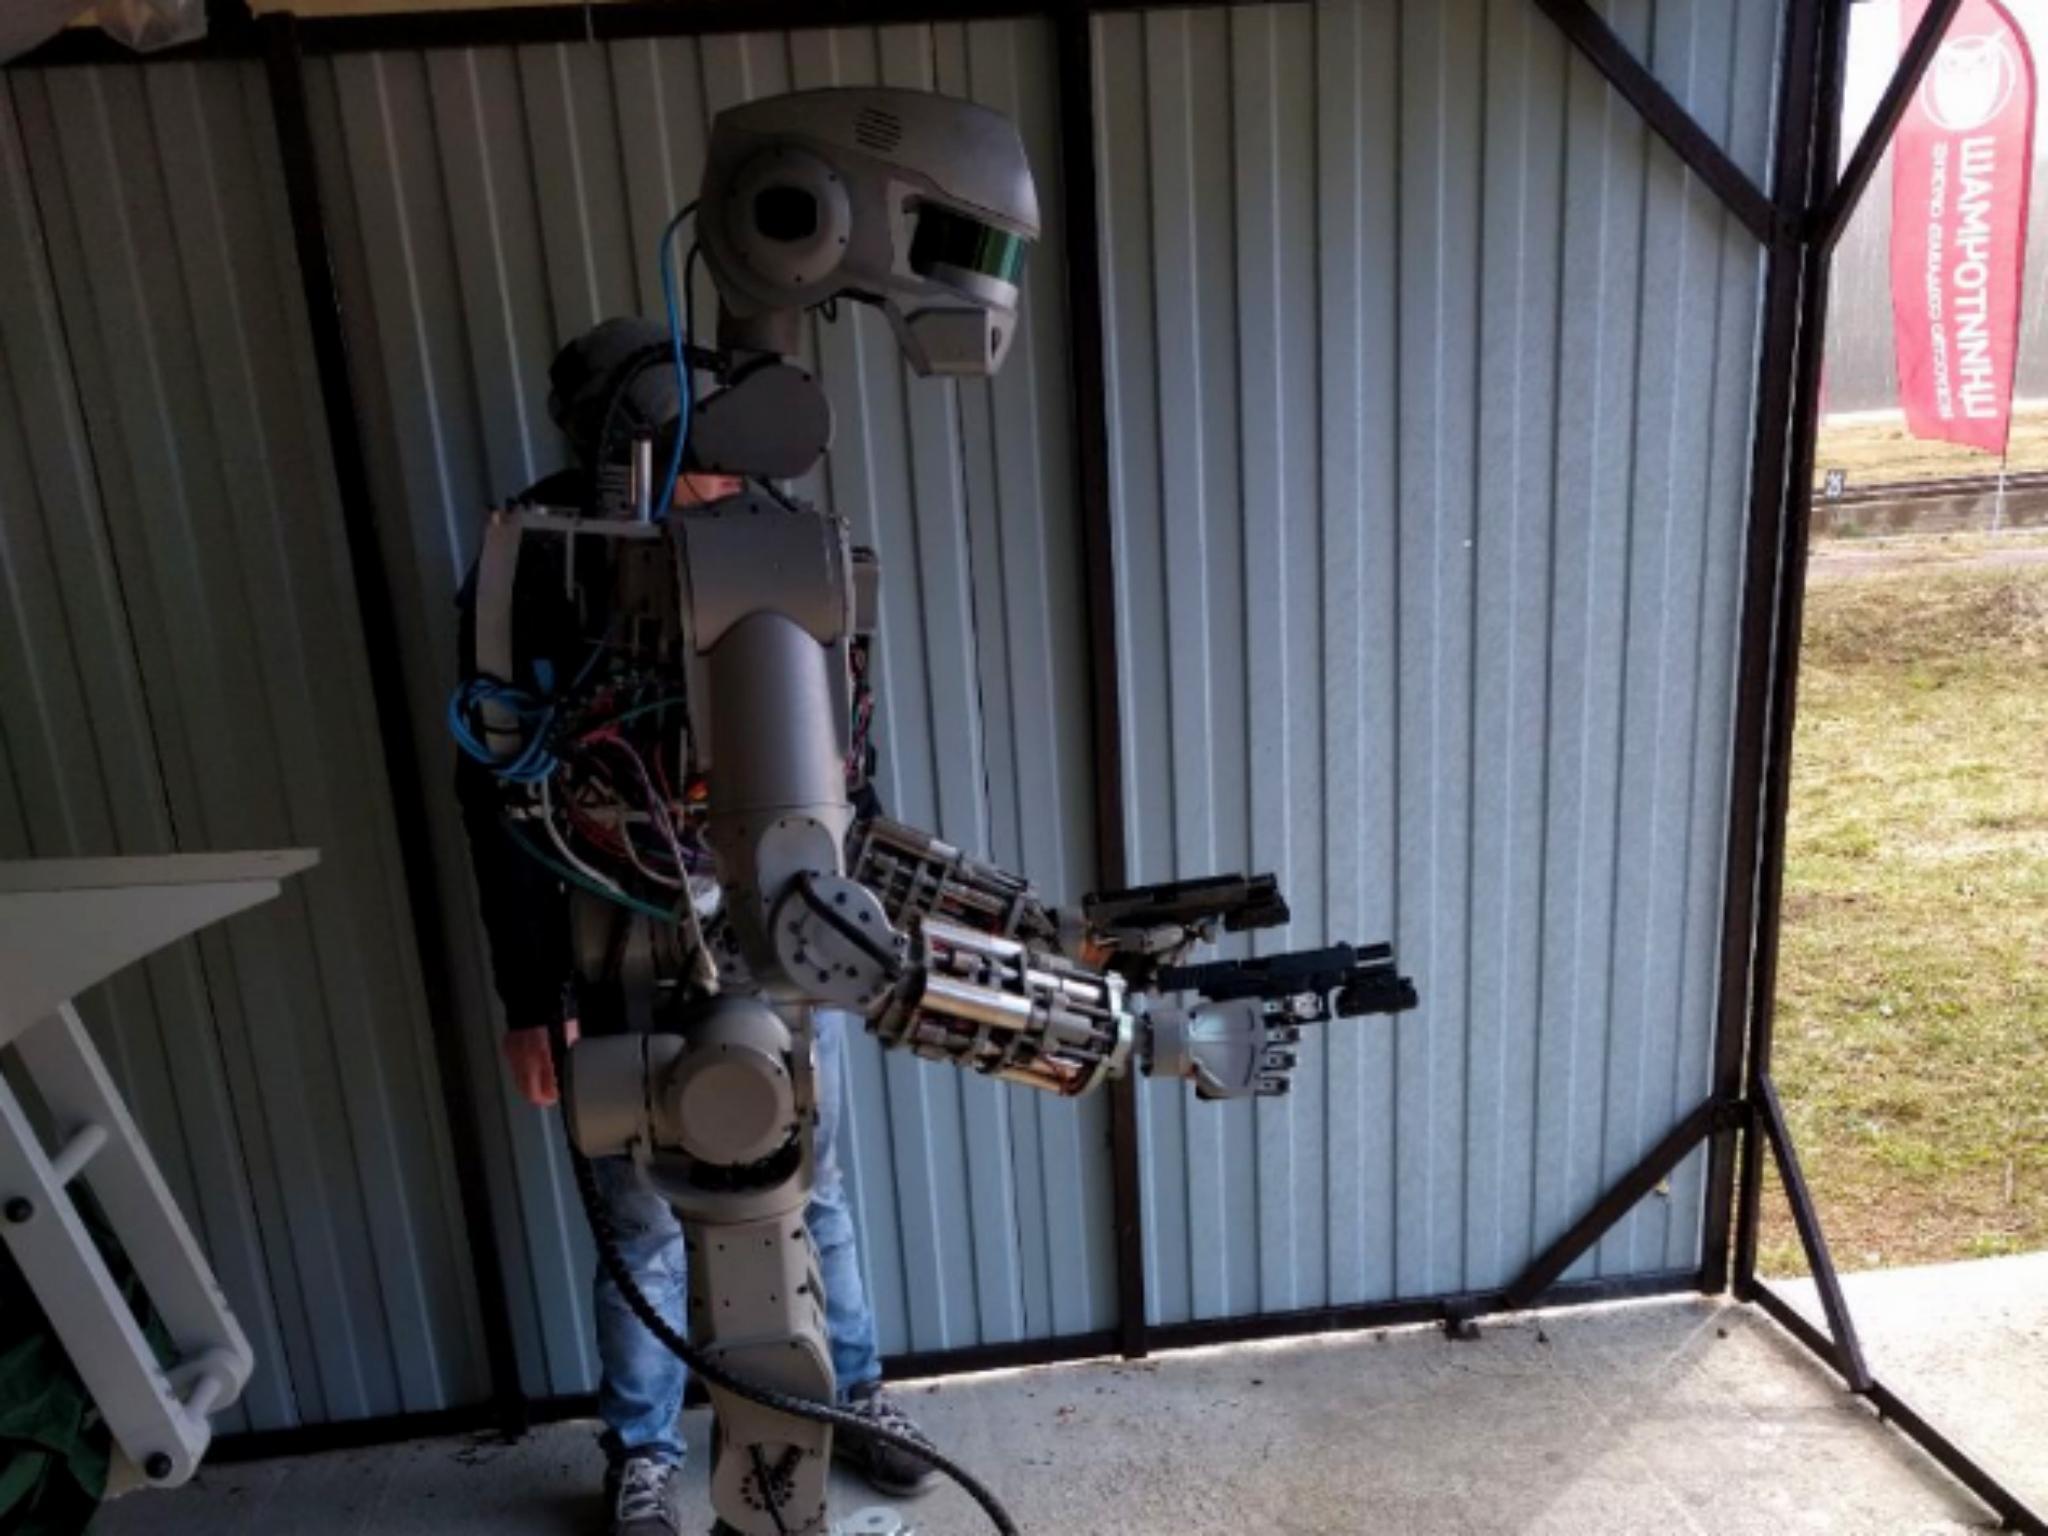 The robot was originally created for rescue work